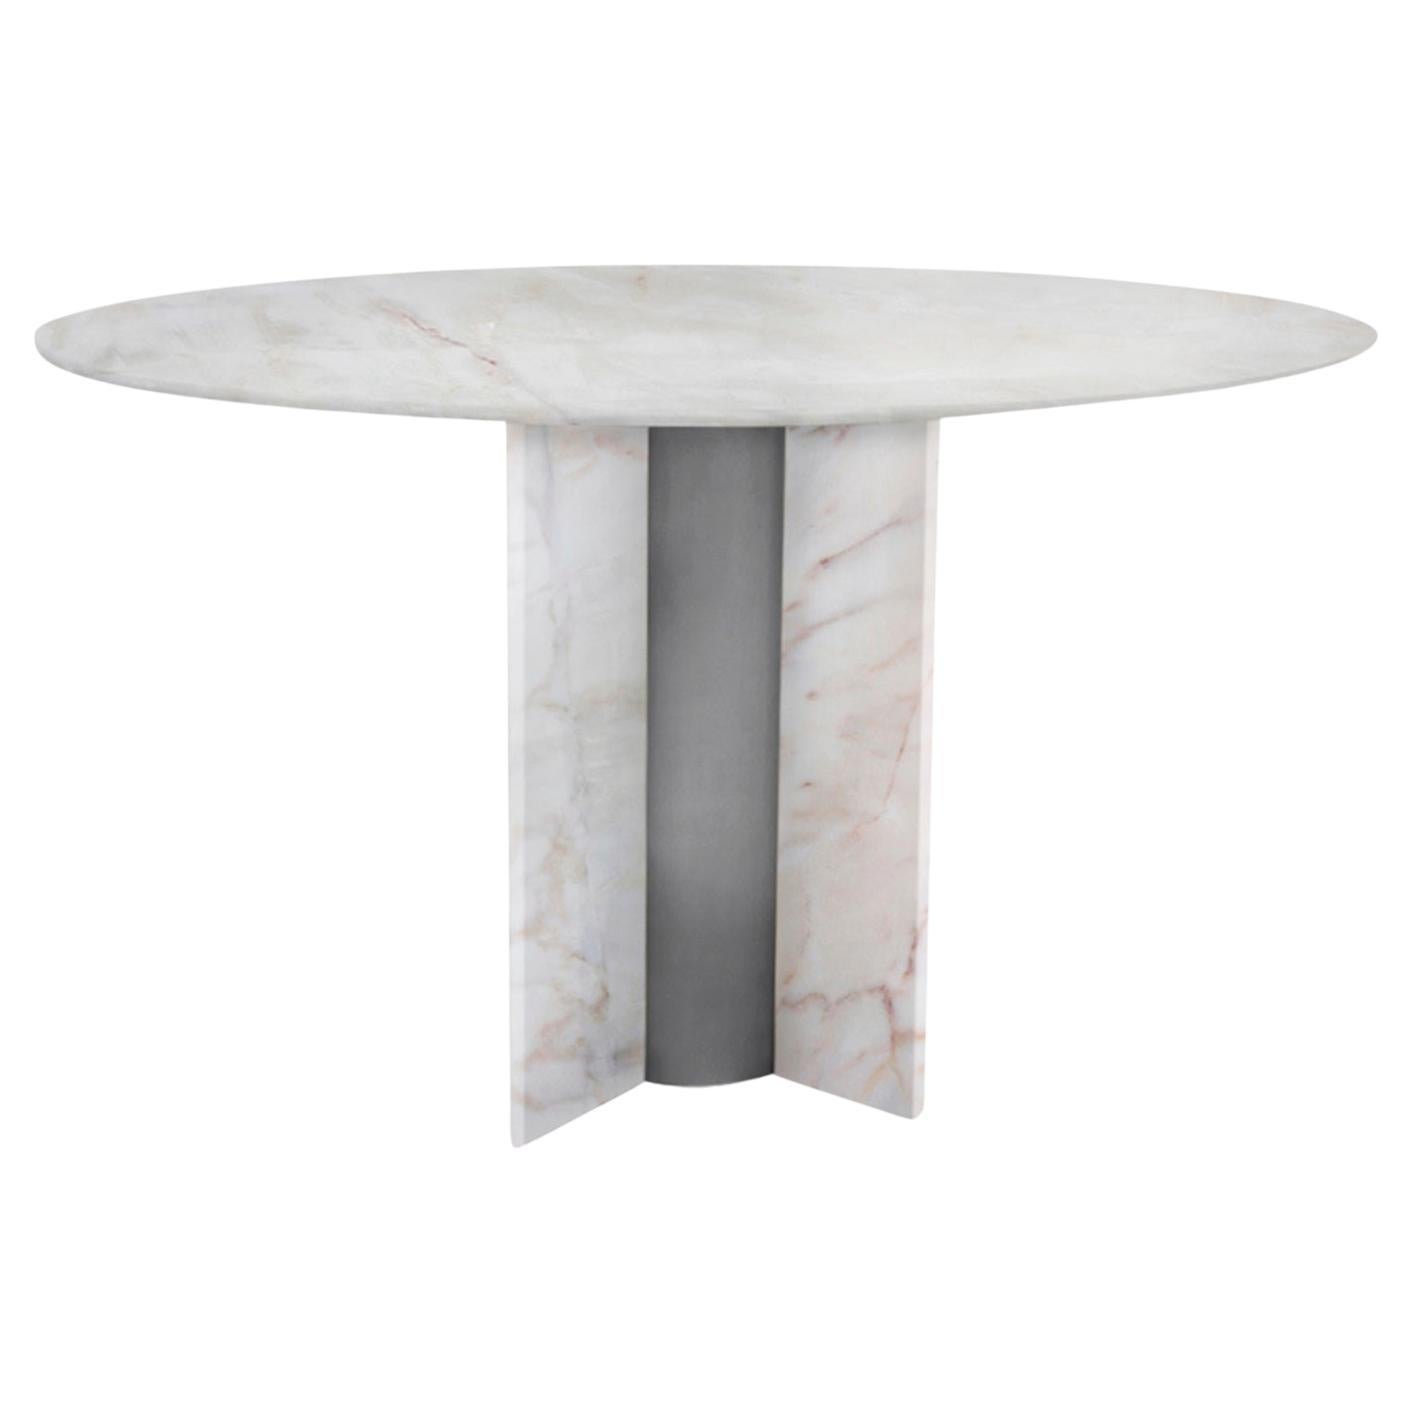 Round Marble Dining Table "Small White Coloss" For Sale